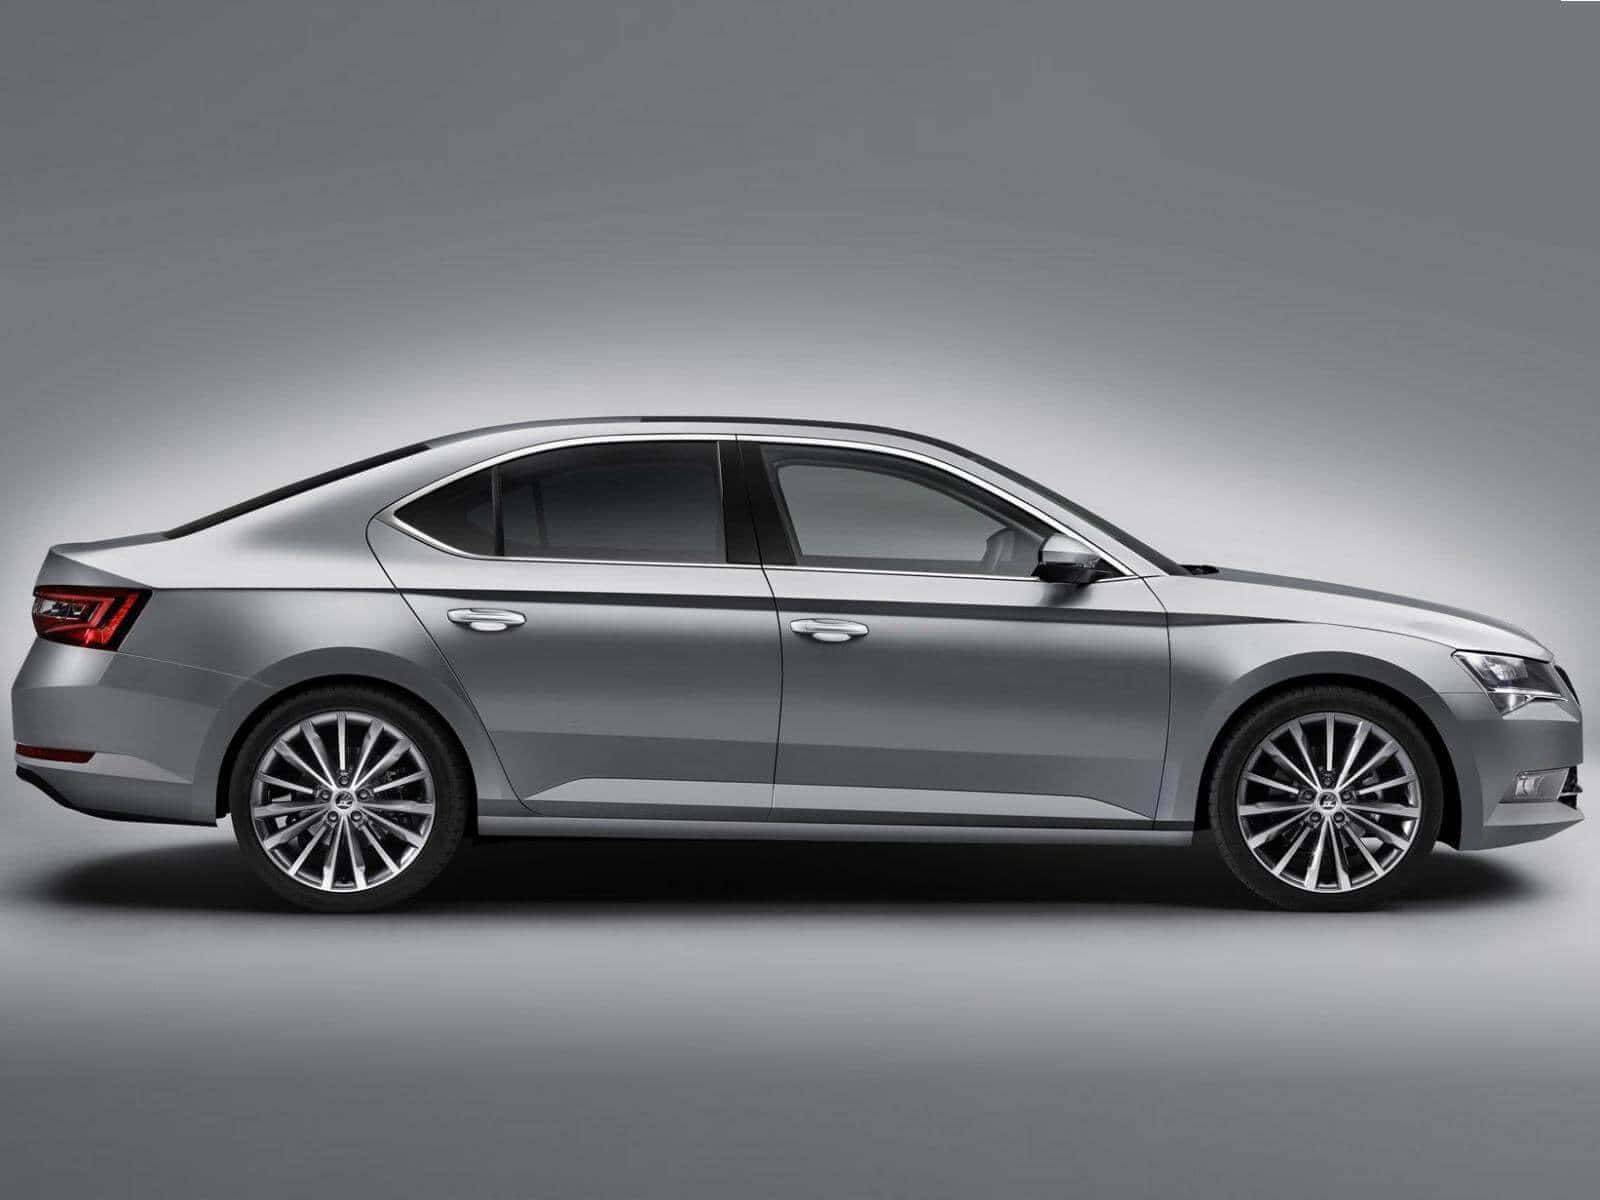 Caption: The Majestic Skoda Superb In Its Full Glory Wallpaper